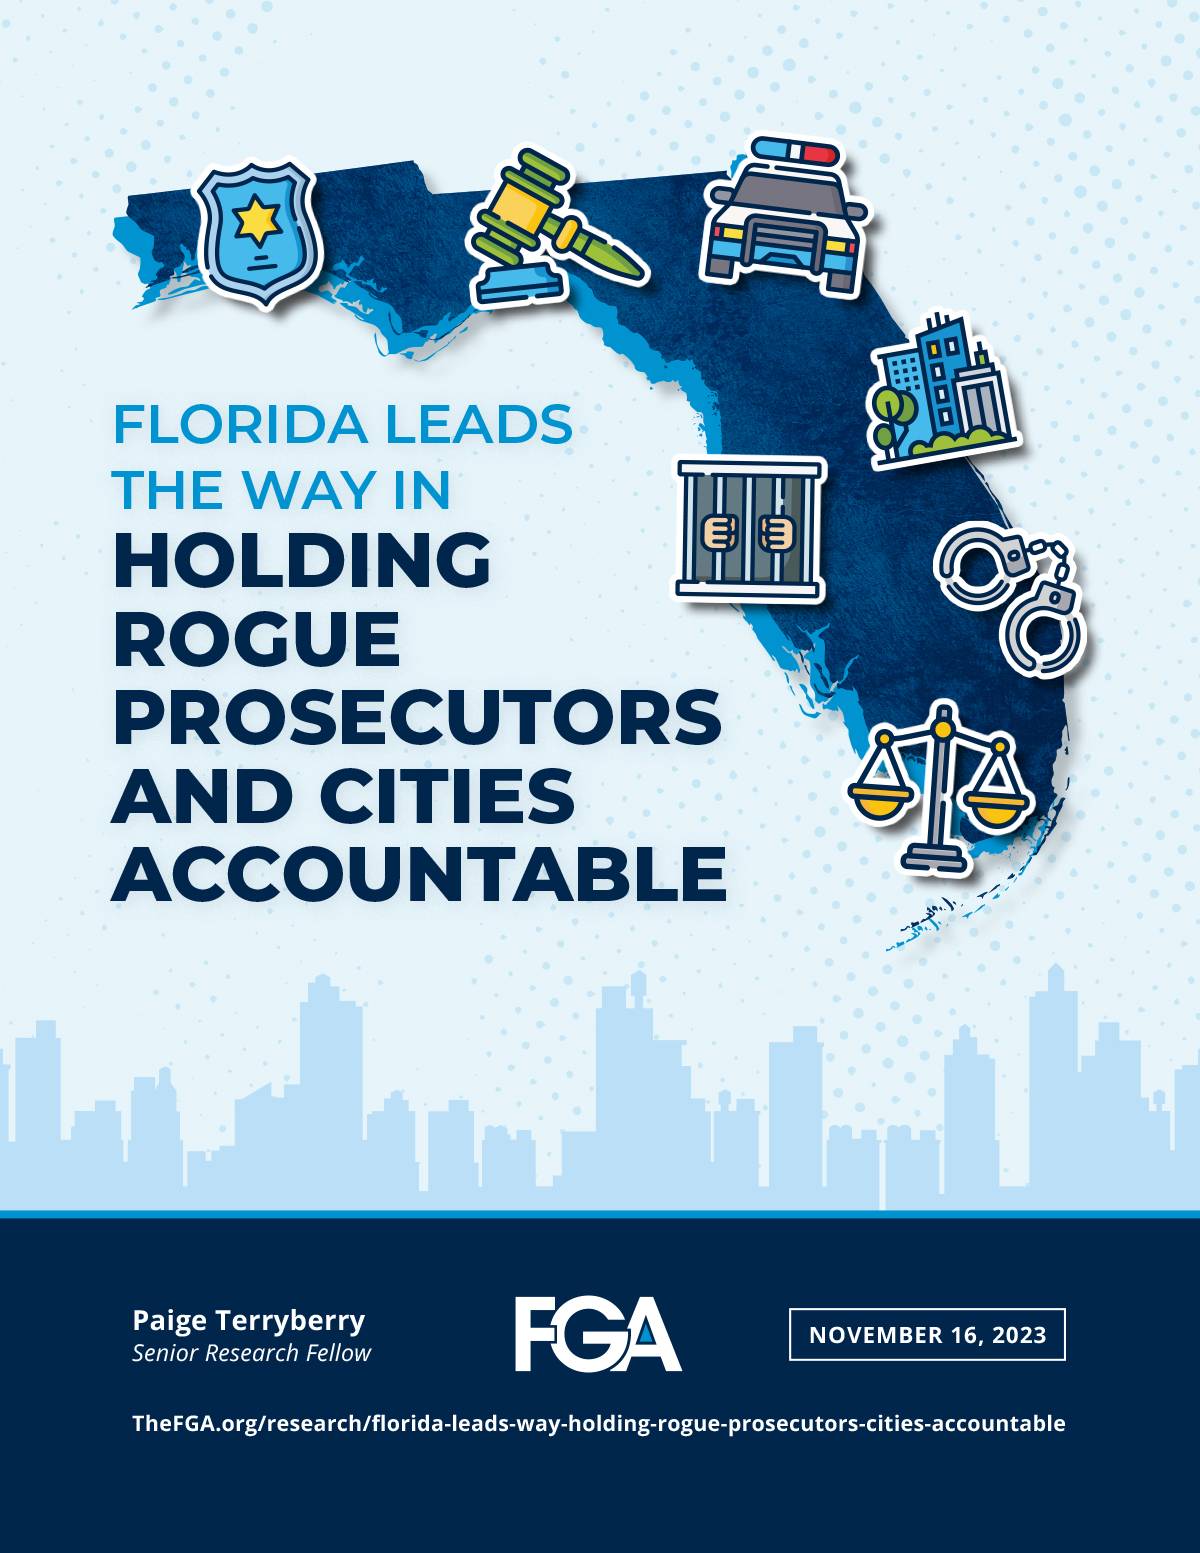 Florida Leads the Way in Holding Rogue Prosecutors and Cities Accountable